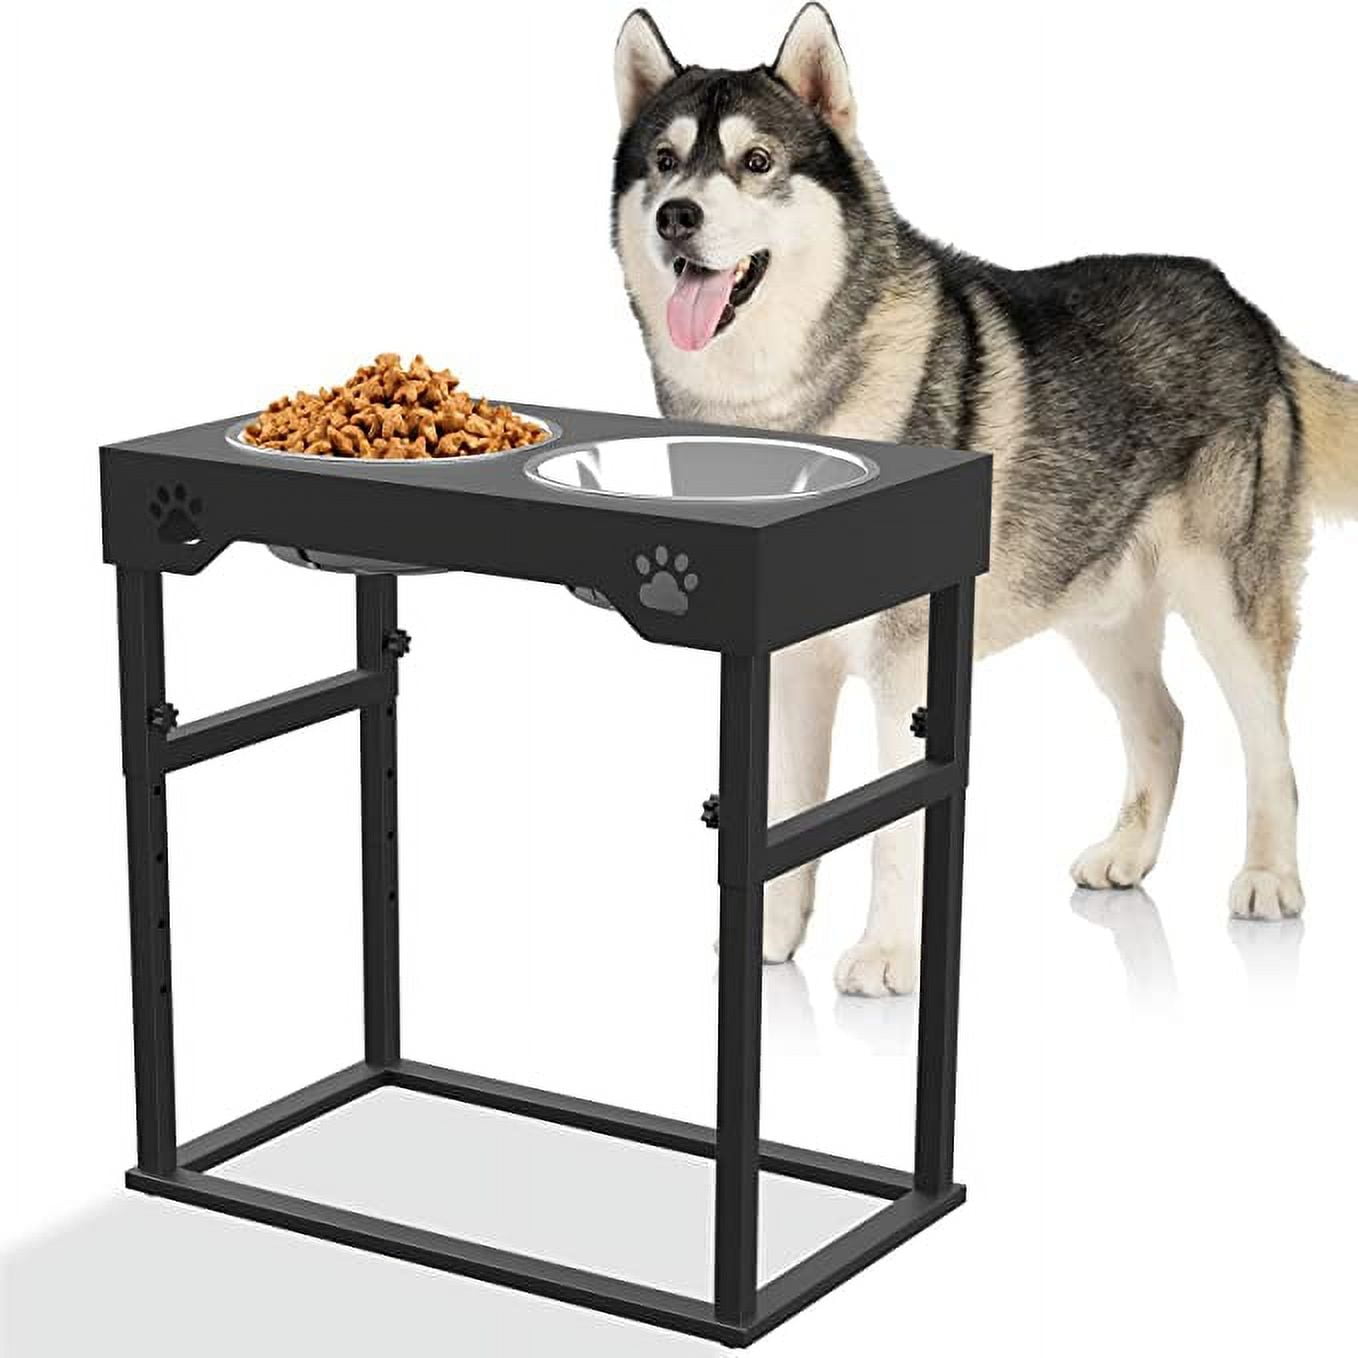 Autofeedog Elevated Dog Bowls For Large Dogs - Raised Dog Bowl with 8  Adjustable Heights (2.75‘’ - 20‘’)Dog Feeding Station with 2 Stainless  Steel Dog